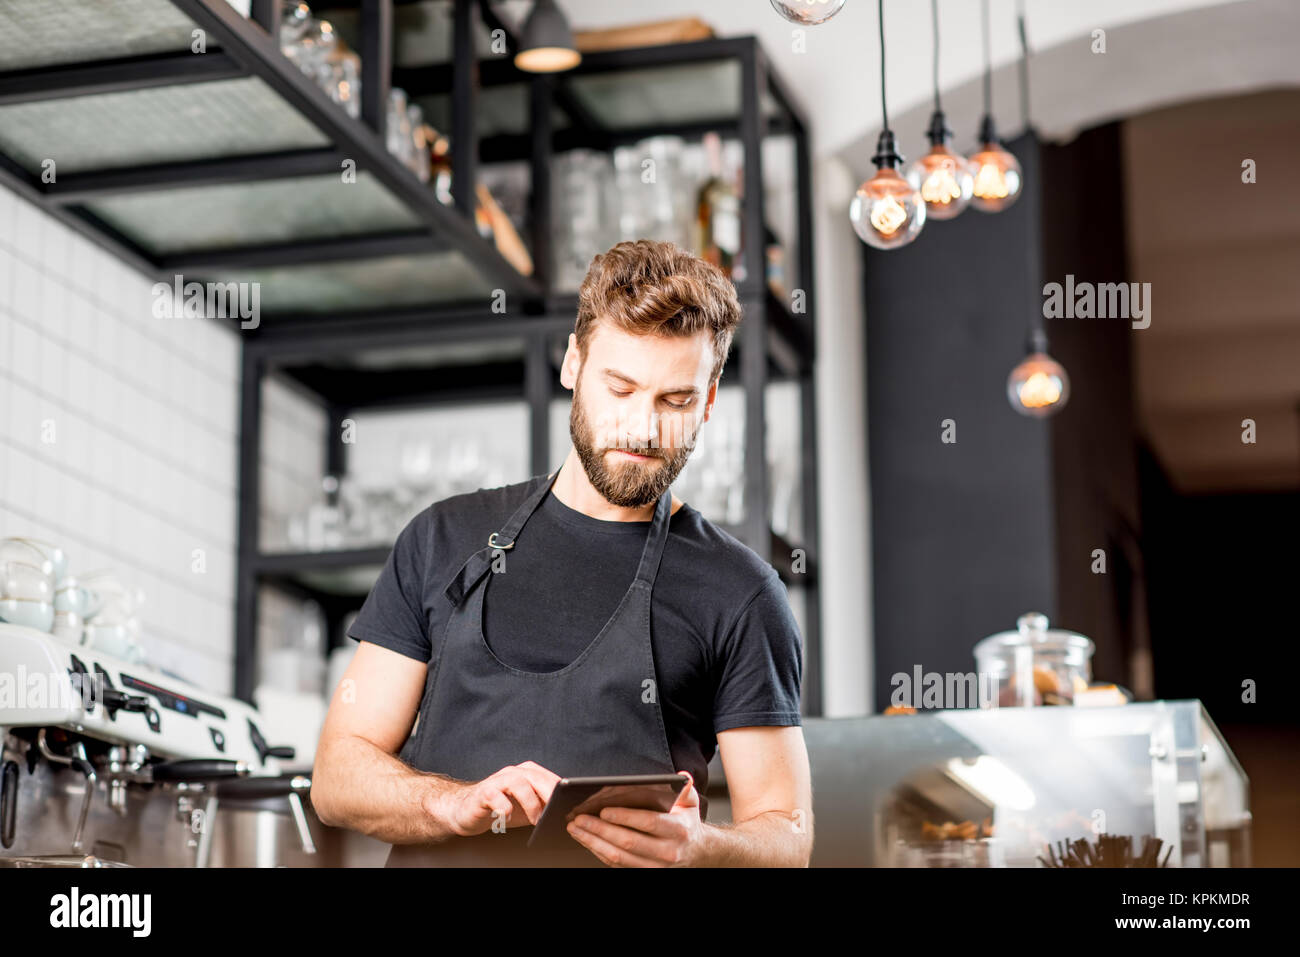 Waiter with tablet at the cafe Stock Photo